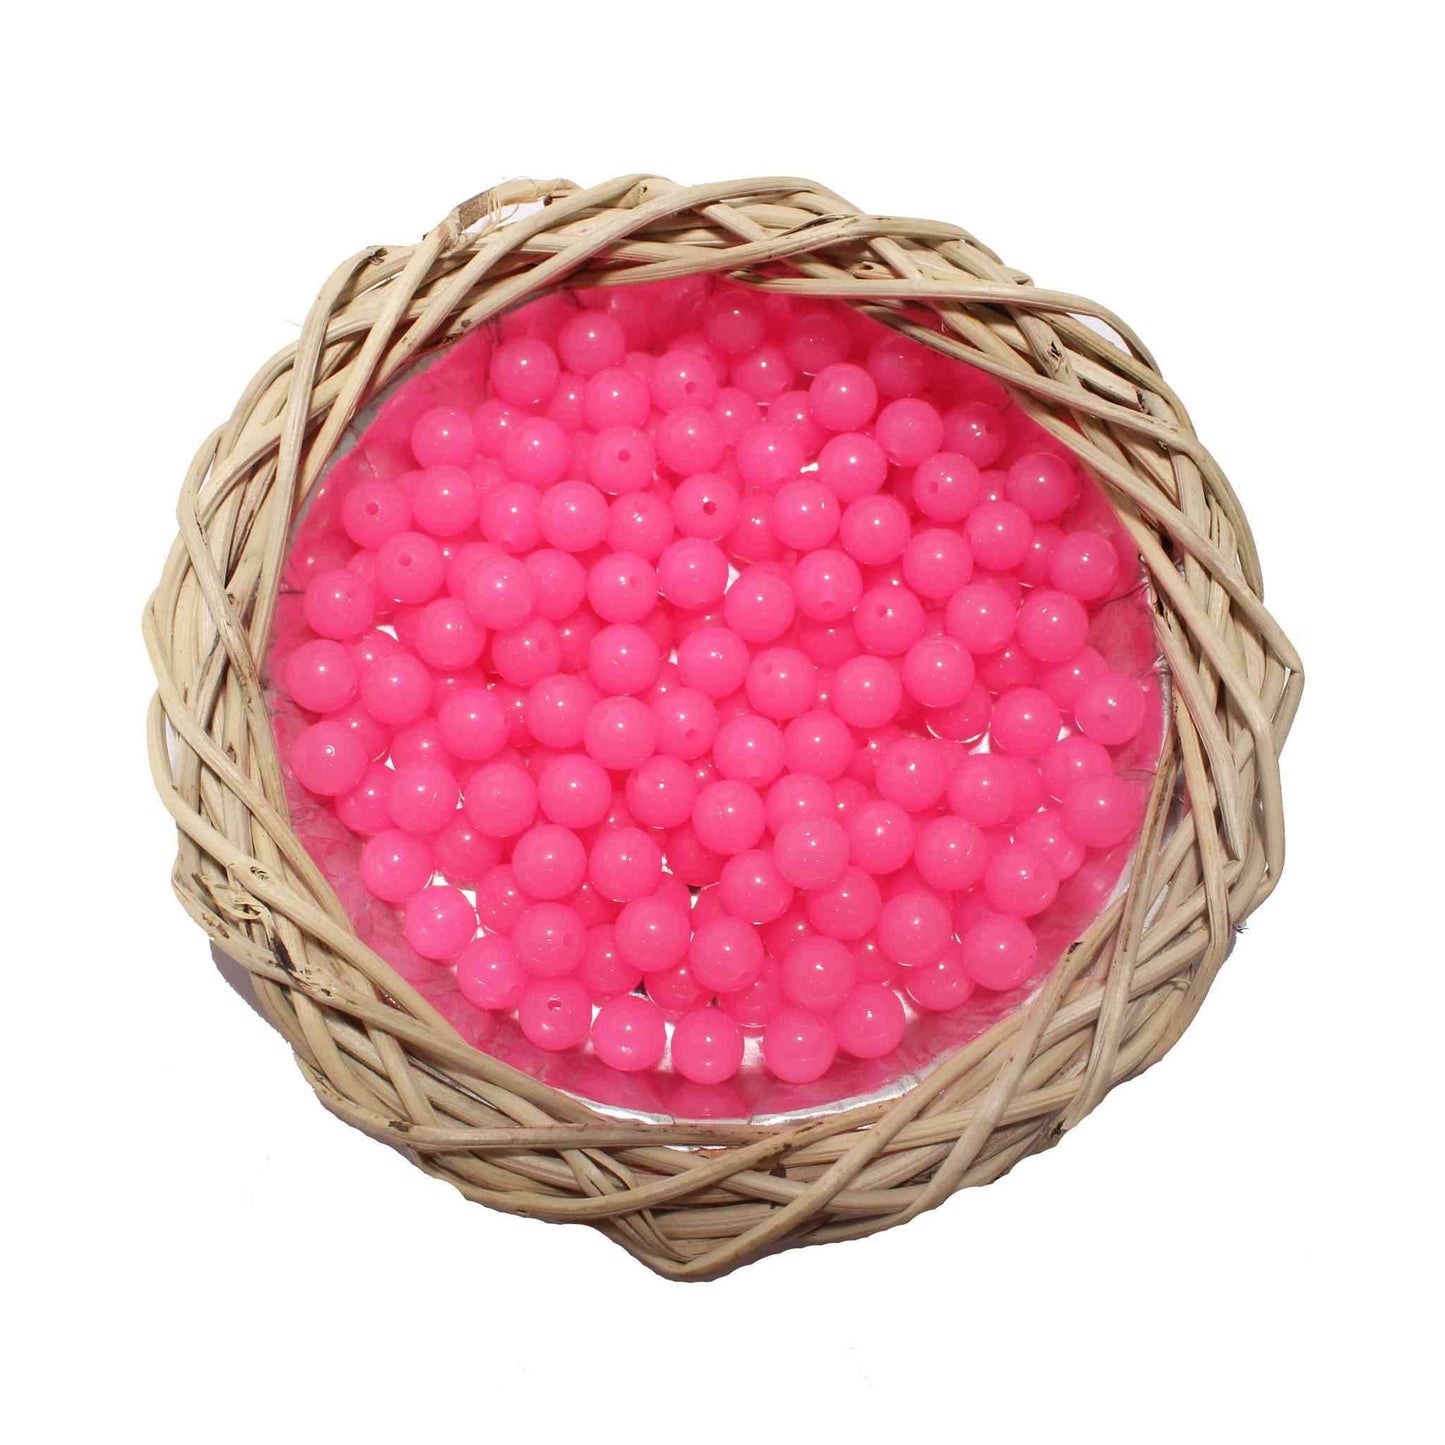 Indian Petals Premium quality Round Glass Beads for DIY Craft, Trousseau Packing or Decoration - Design 734, Hot Pink - Indian Petals